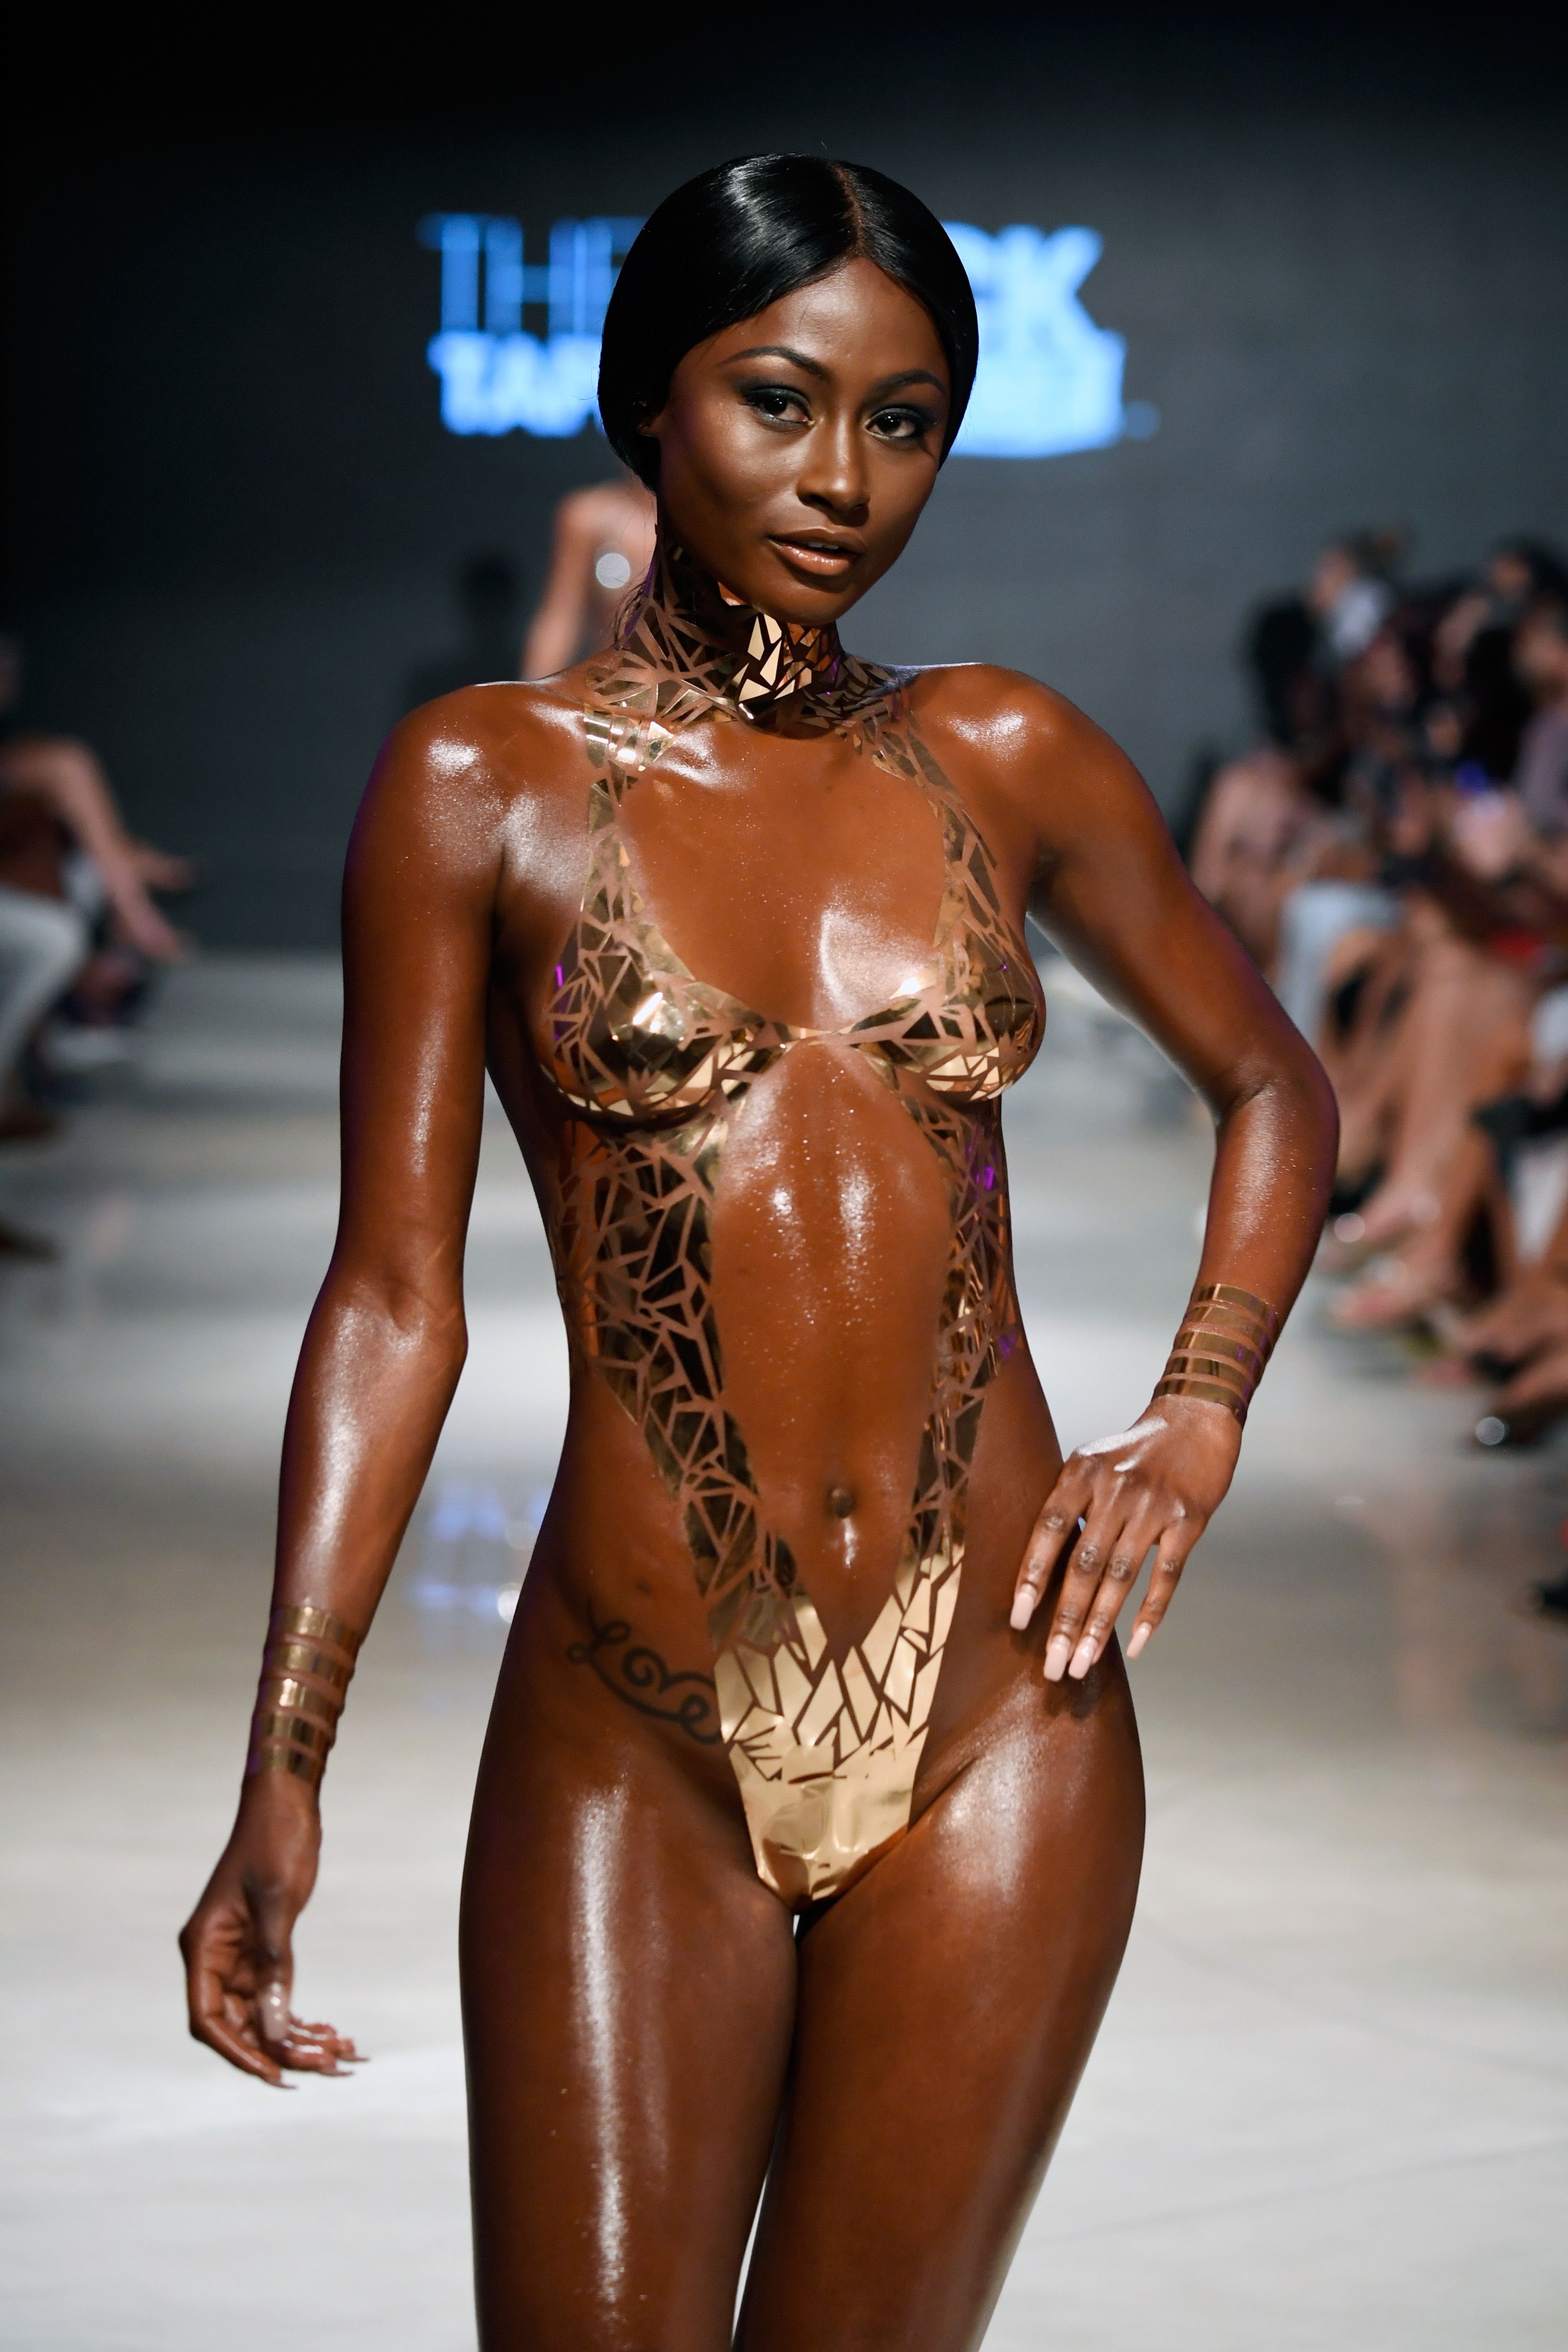 Nearly Naked Metallic Tape Swimsuits Exist - All About the Black